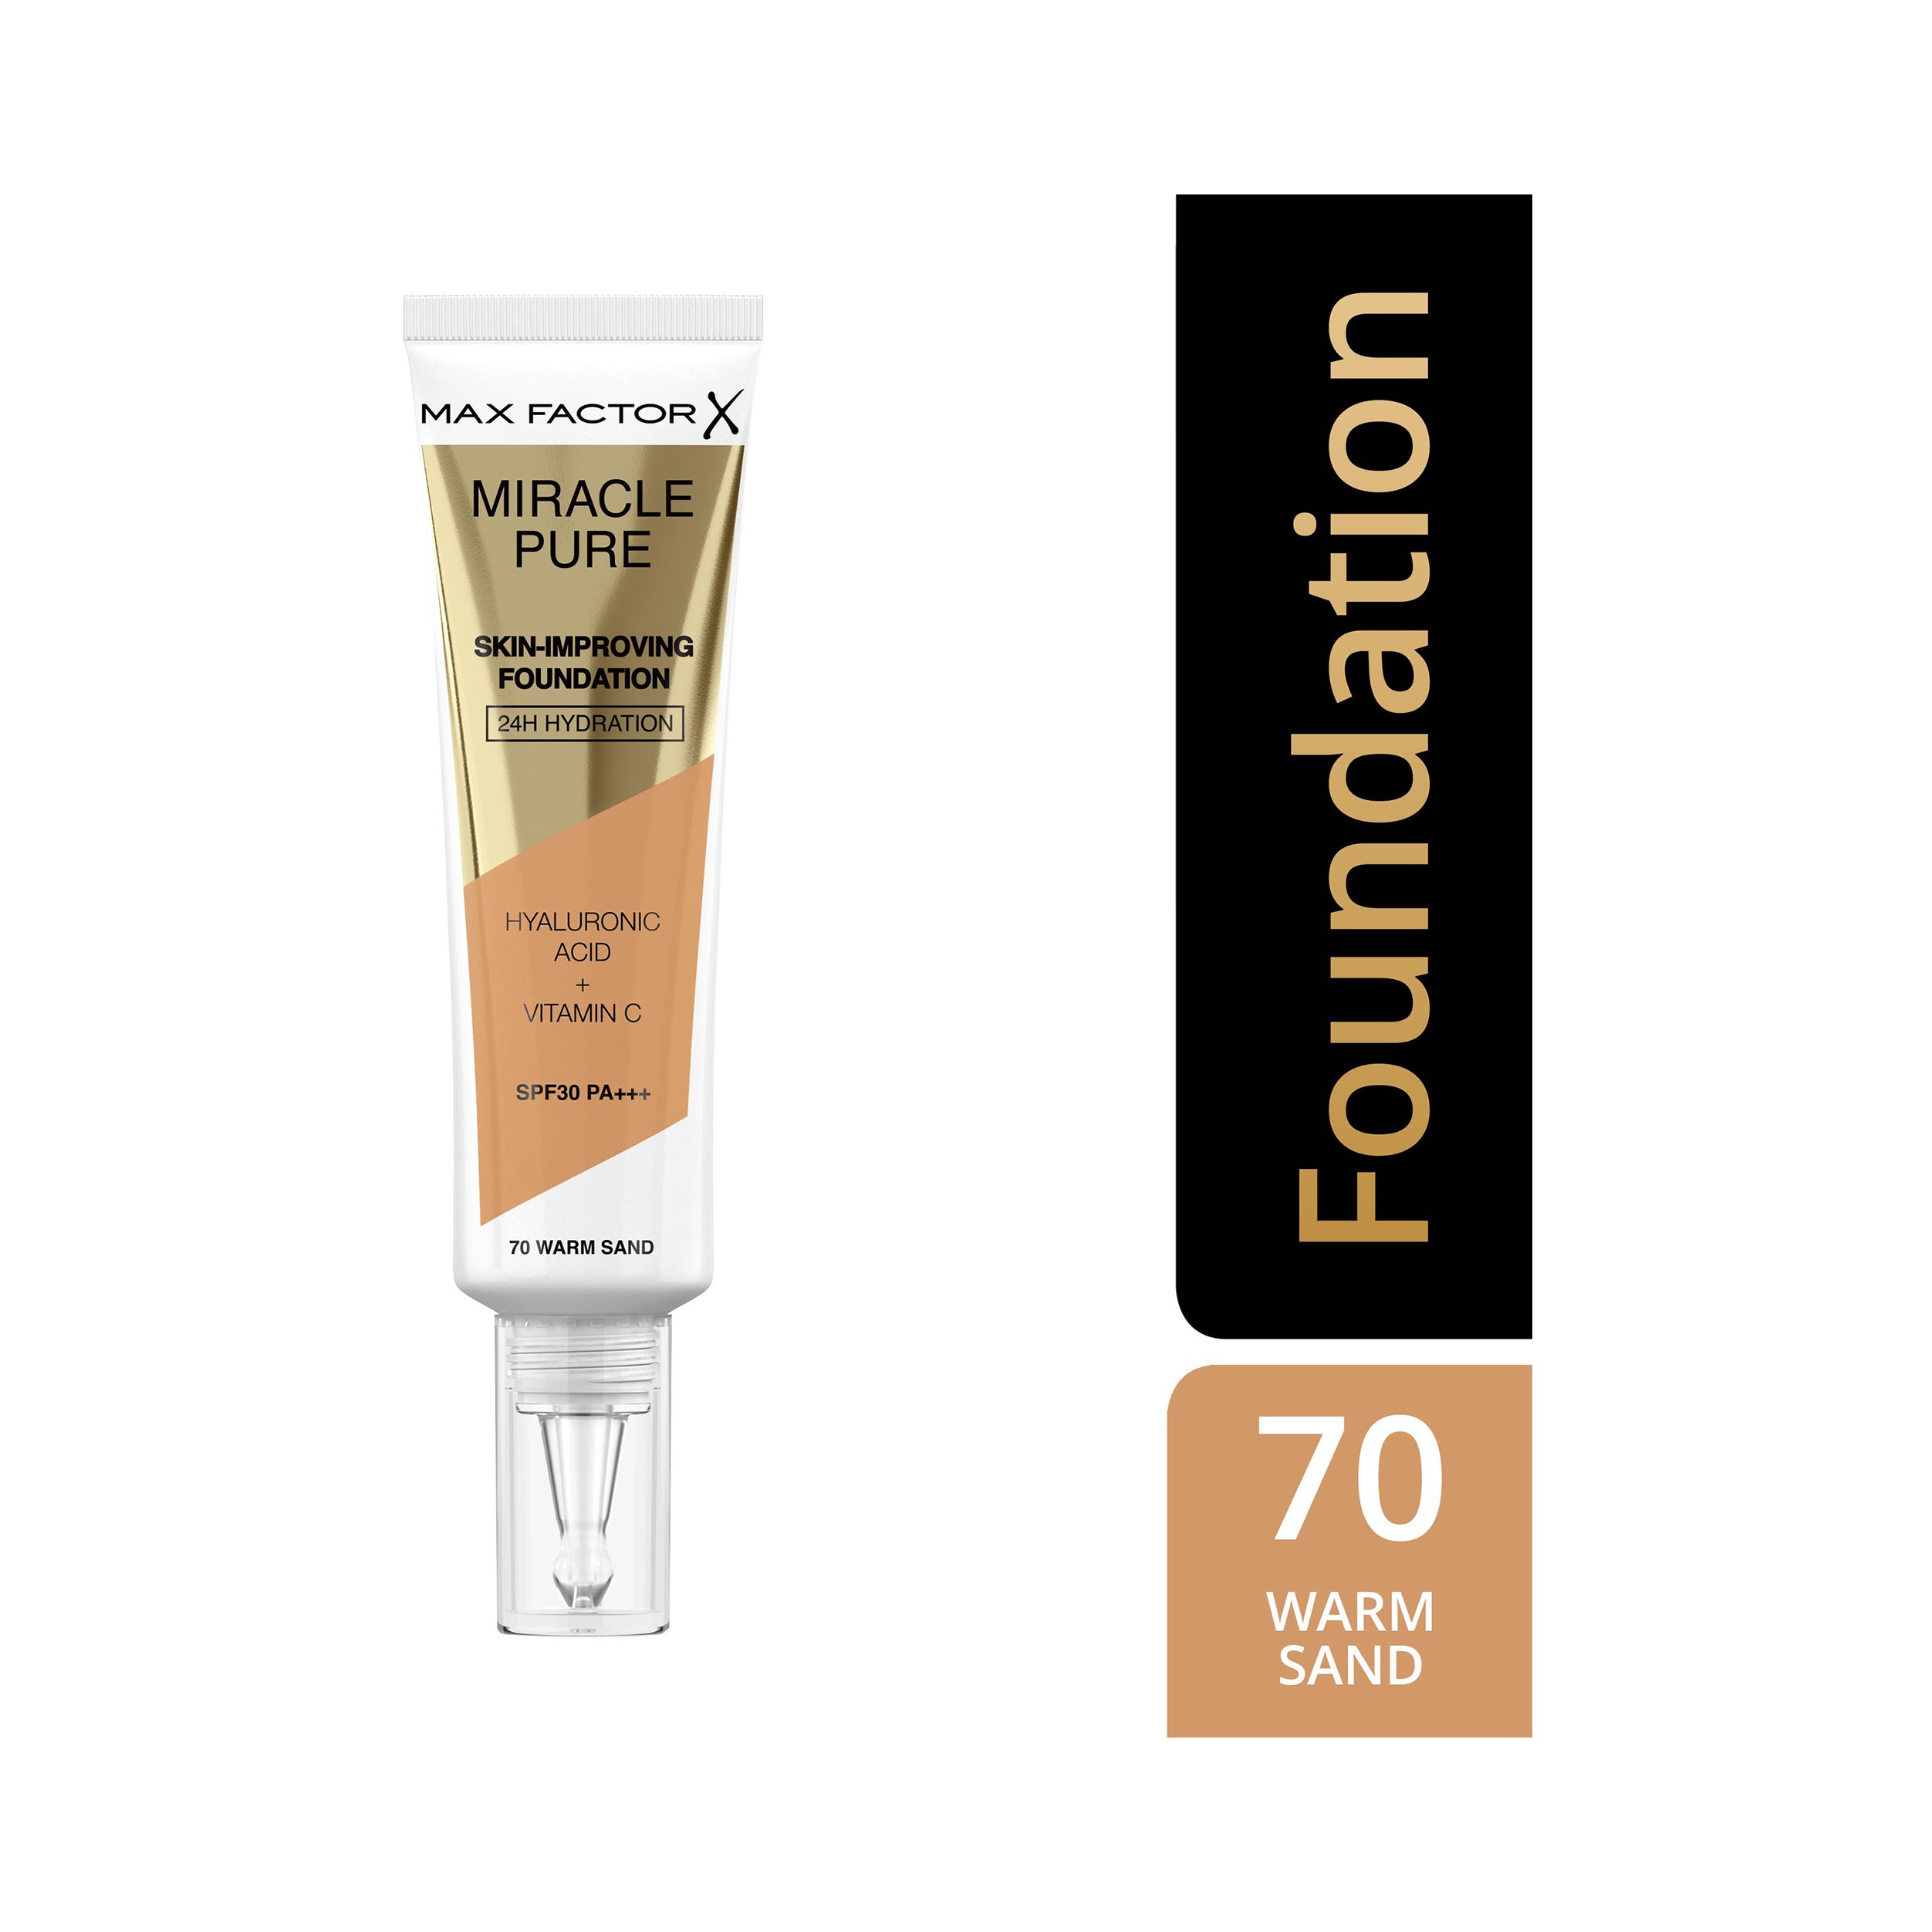 Läs mer om Max Factor Miracle Pure Skin-Improving Foundation 70 Warm Sand